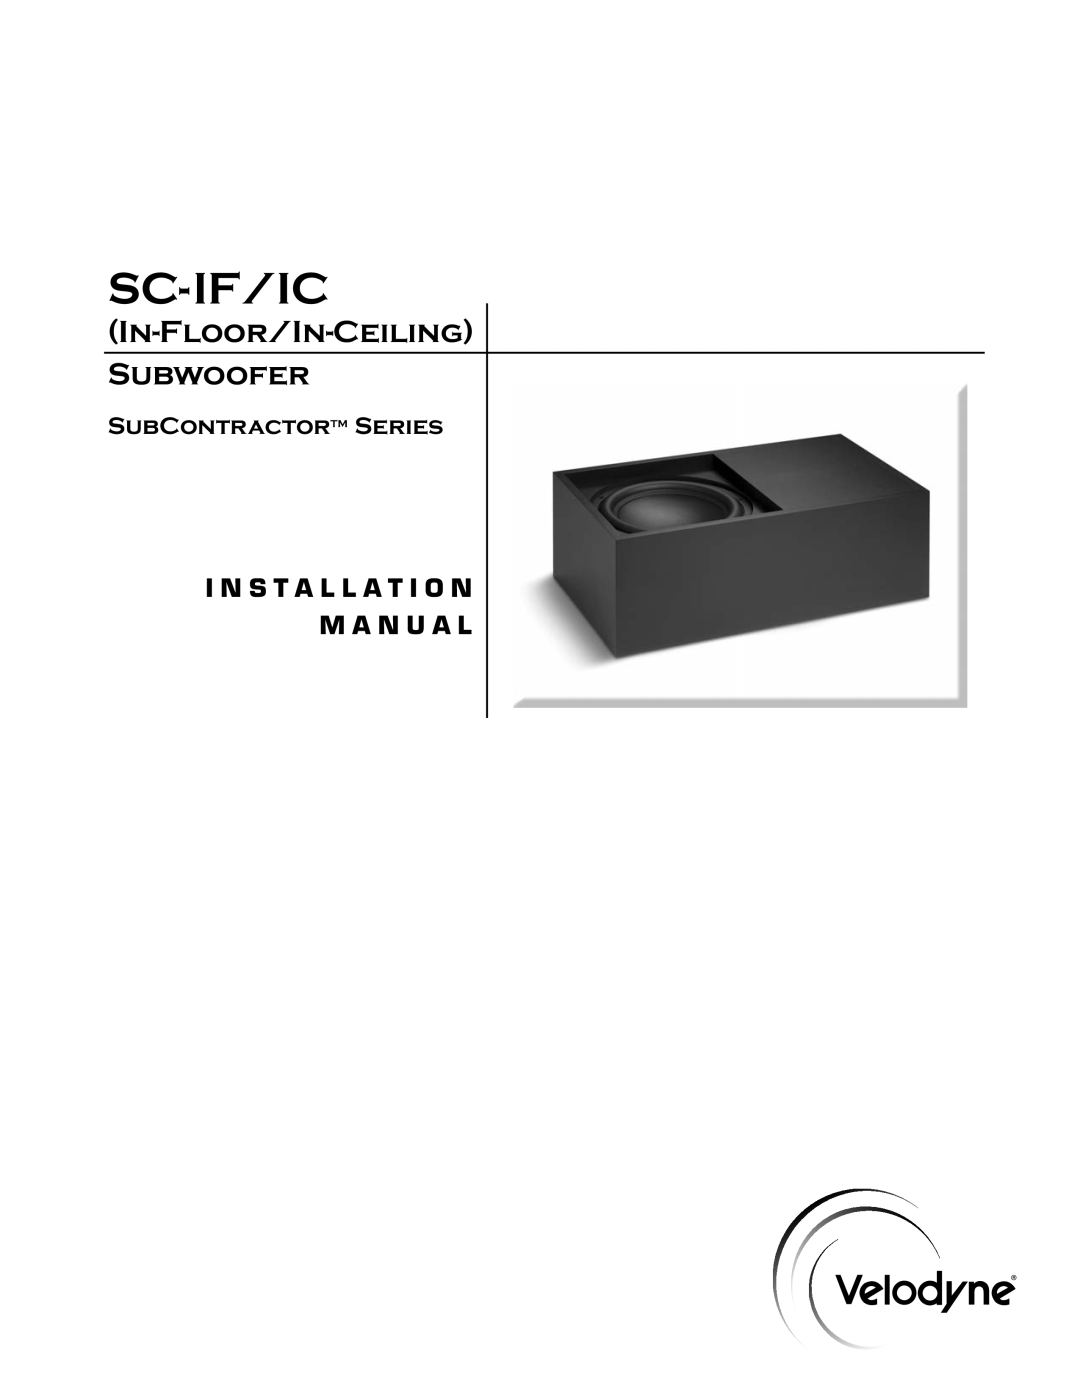 Velodyne Acoustics SC-IF/IC installation manual Sc-If/Ic, In-Floor/In-CeilingSubwoofer, SubContractorTM Series 